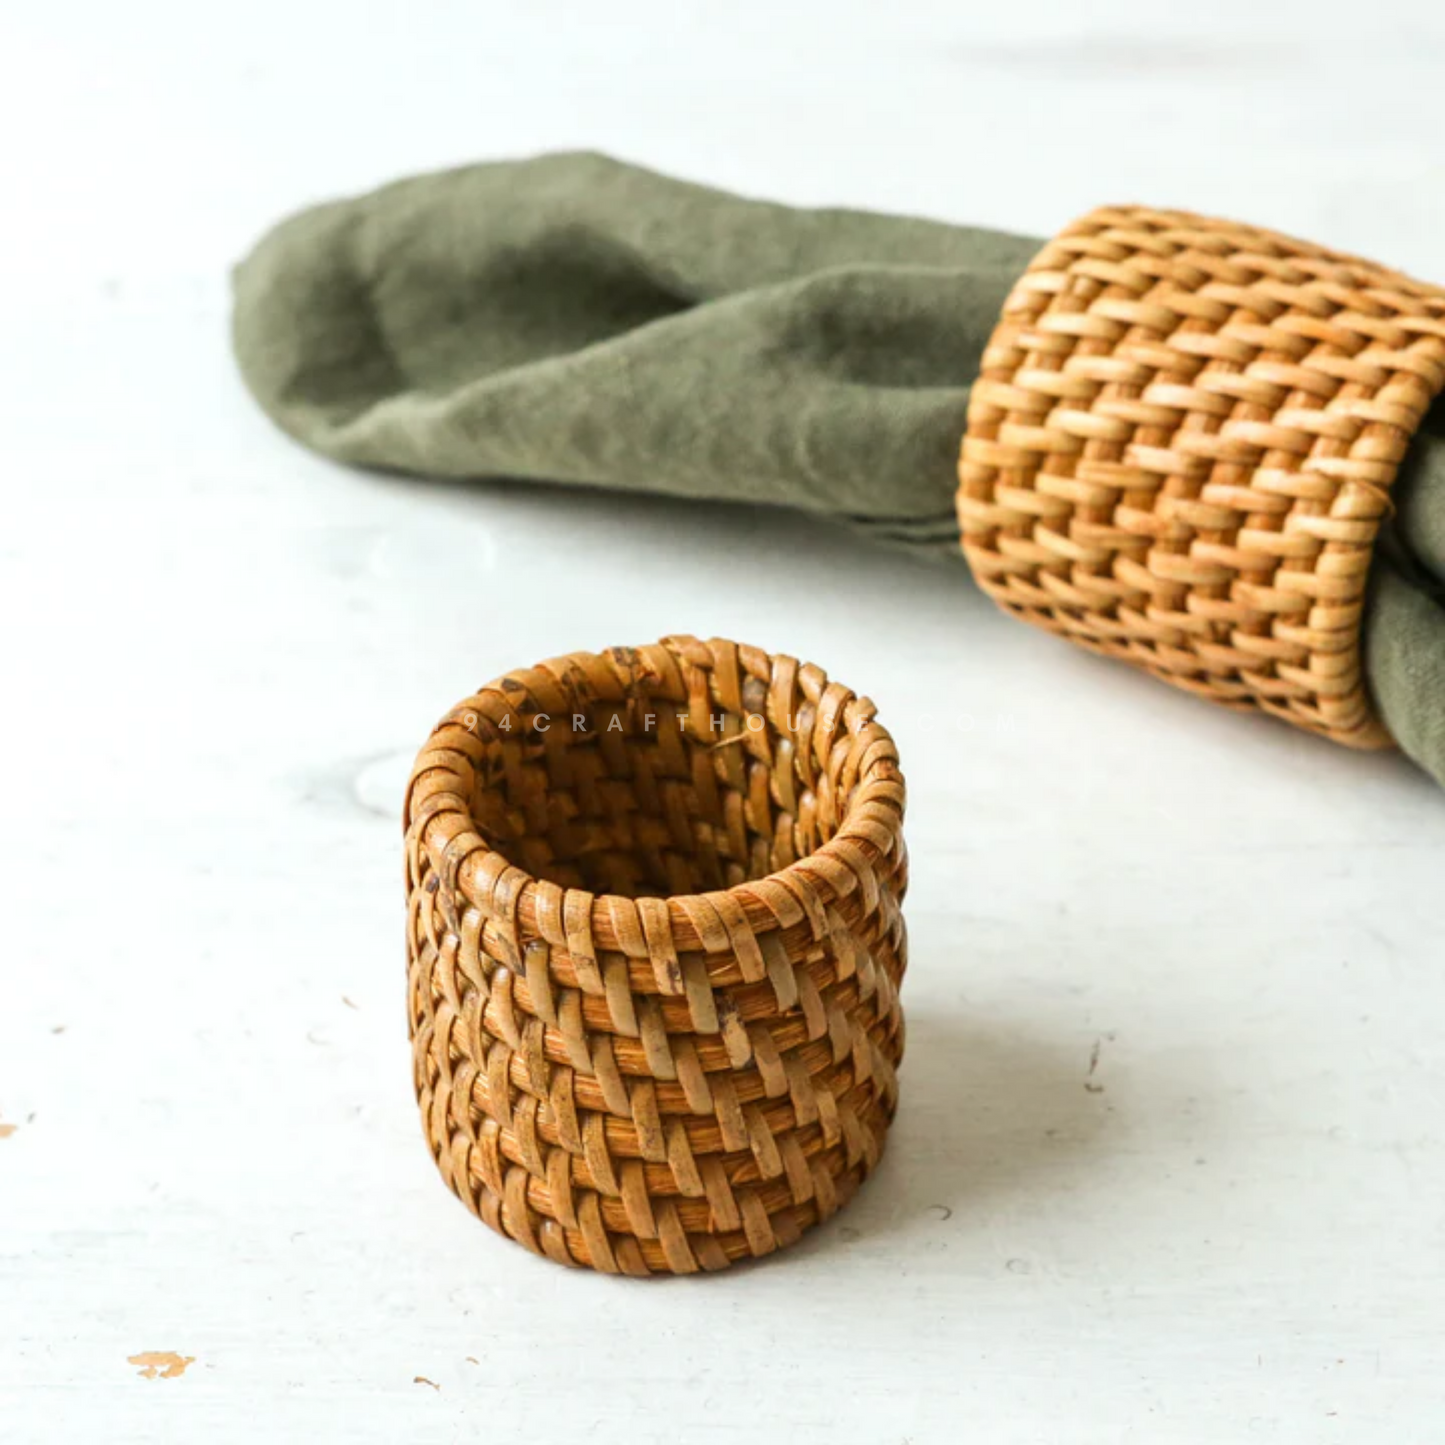 Round Rattan Napkin Rings and Holders Set for Dining Table Decor